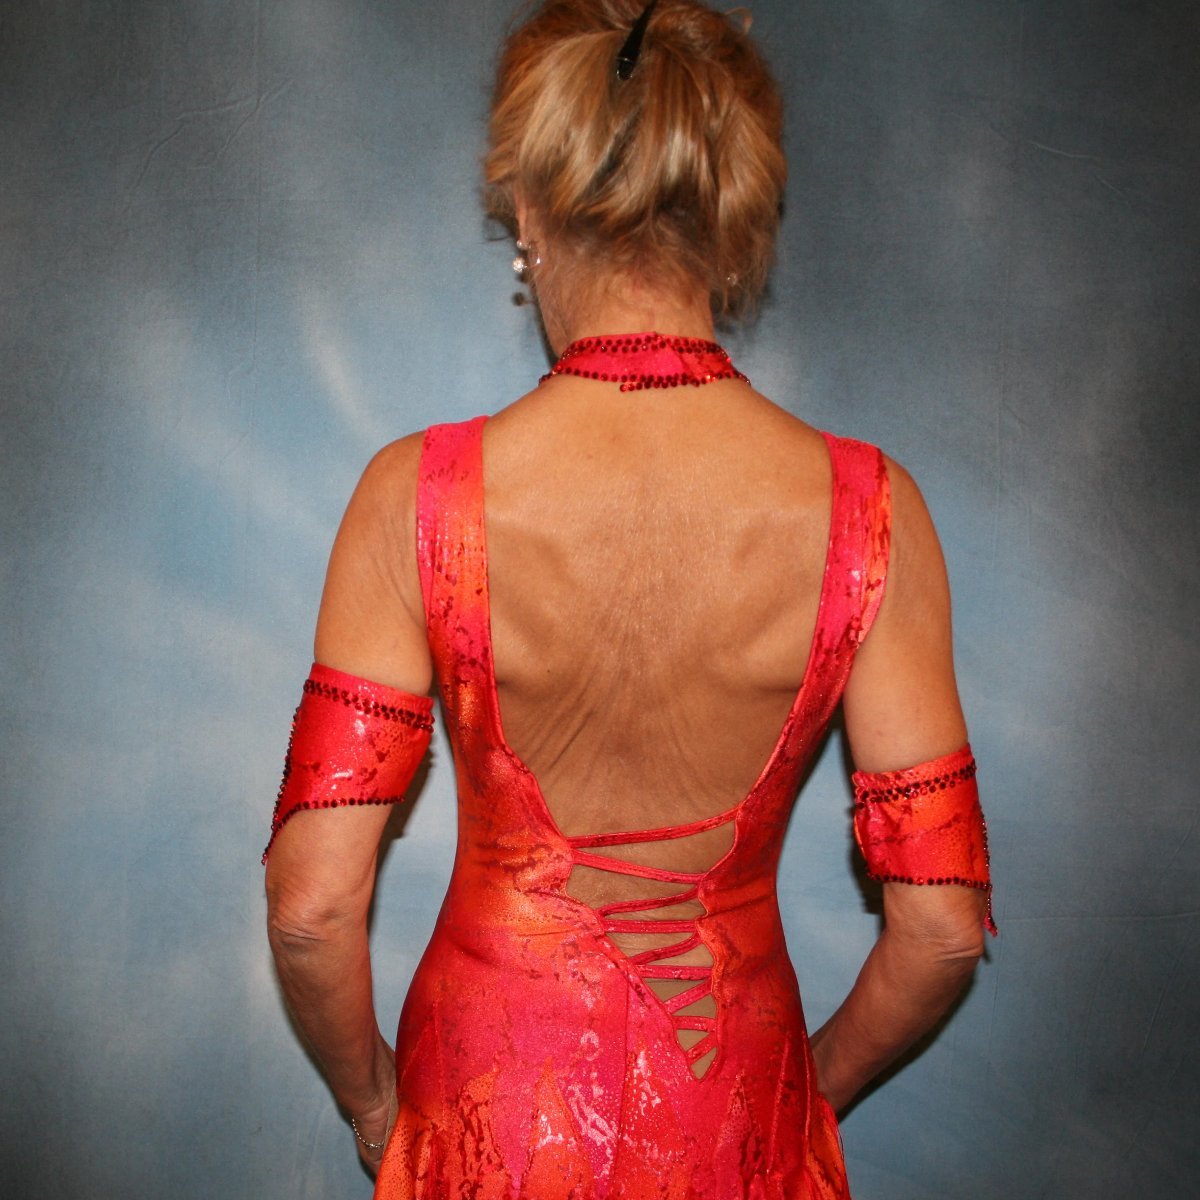 close back view of Red Latin/rhythm dress with fringe, created in a gorgeous Lava hologram metallic lycra of reds, oranges & a touch of yellow, features intricut strapping/lattice detail in design along with several panels bordered with red silky fringe. Neckpiece & arm bands are embellished with siam Swarovski rhinestones.